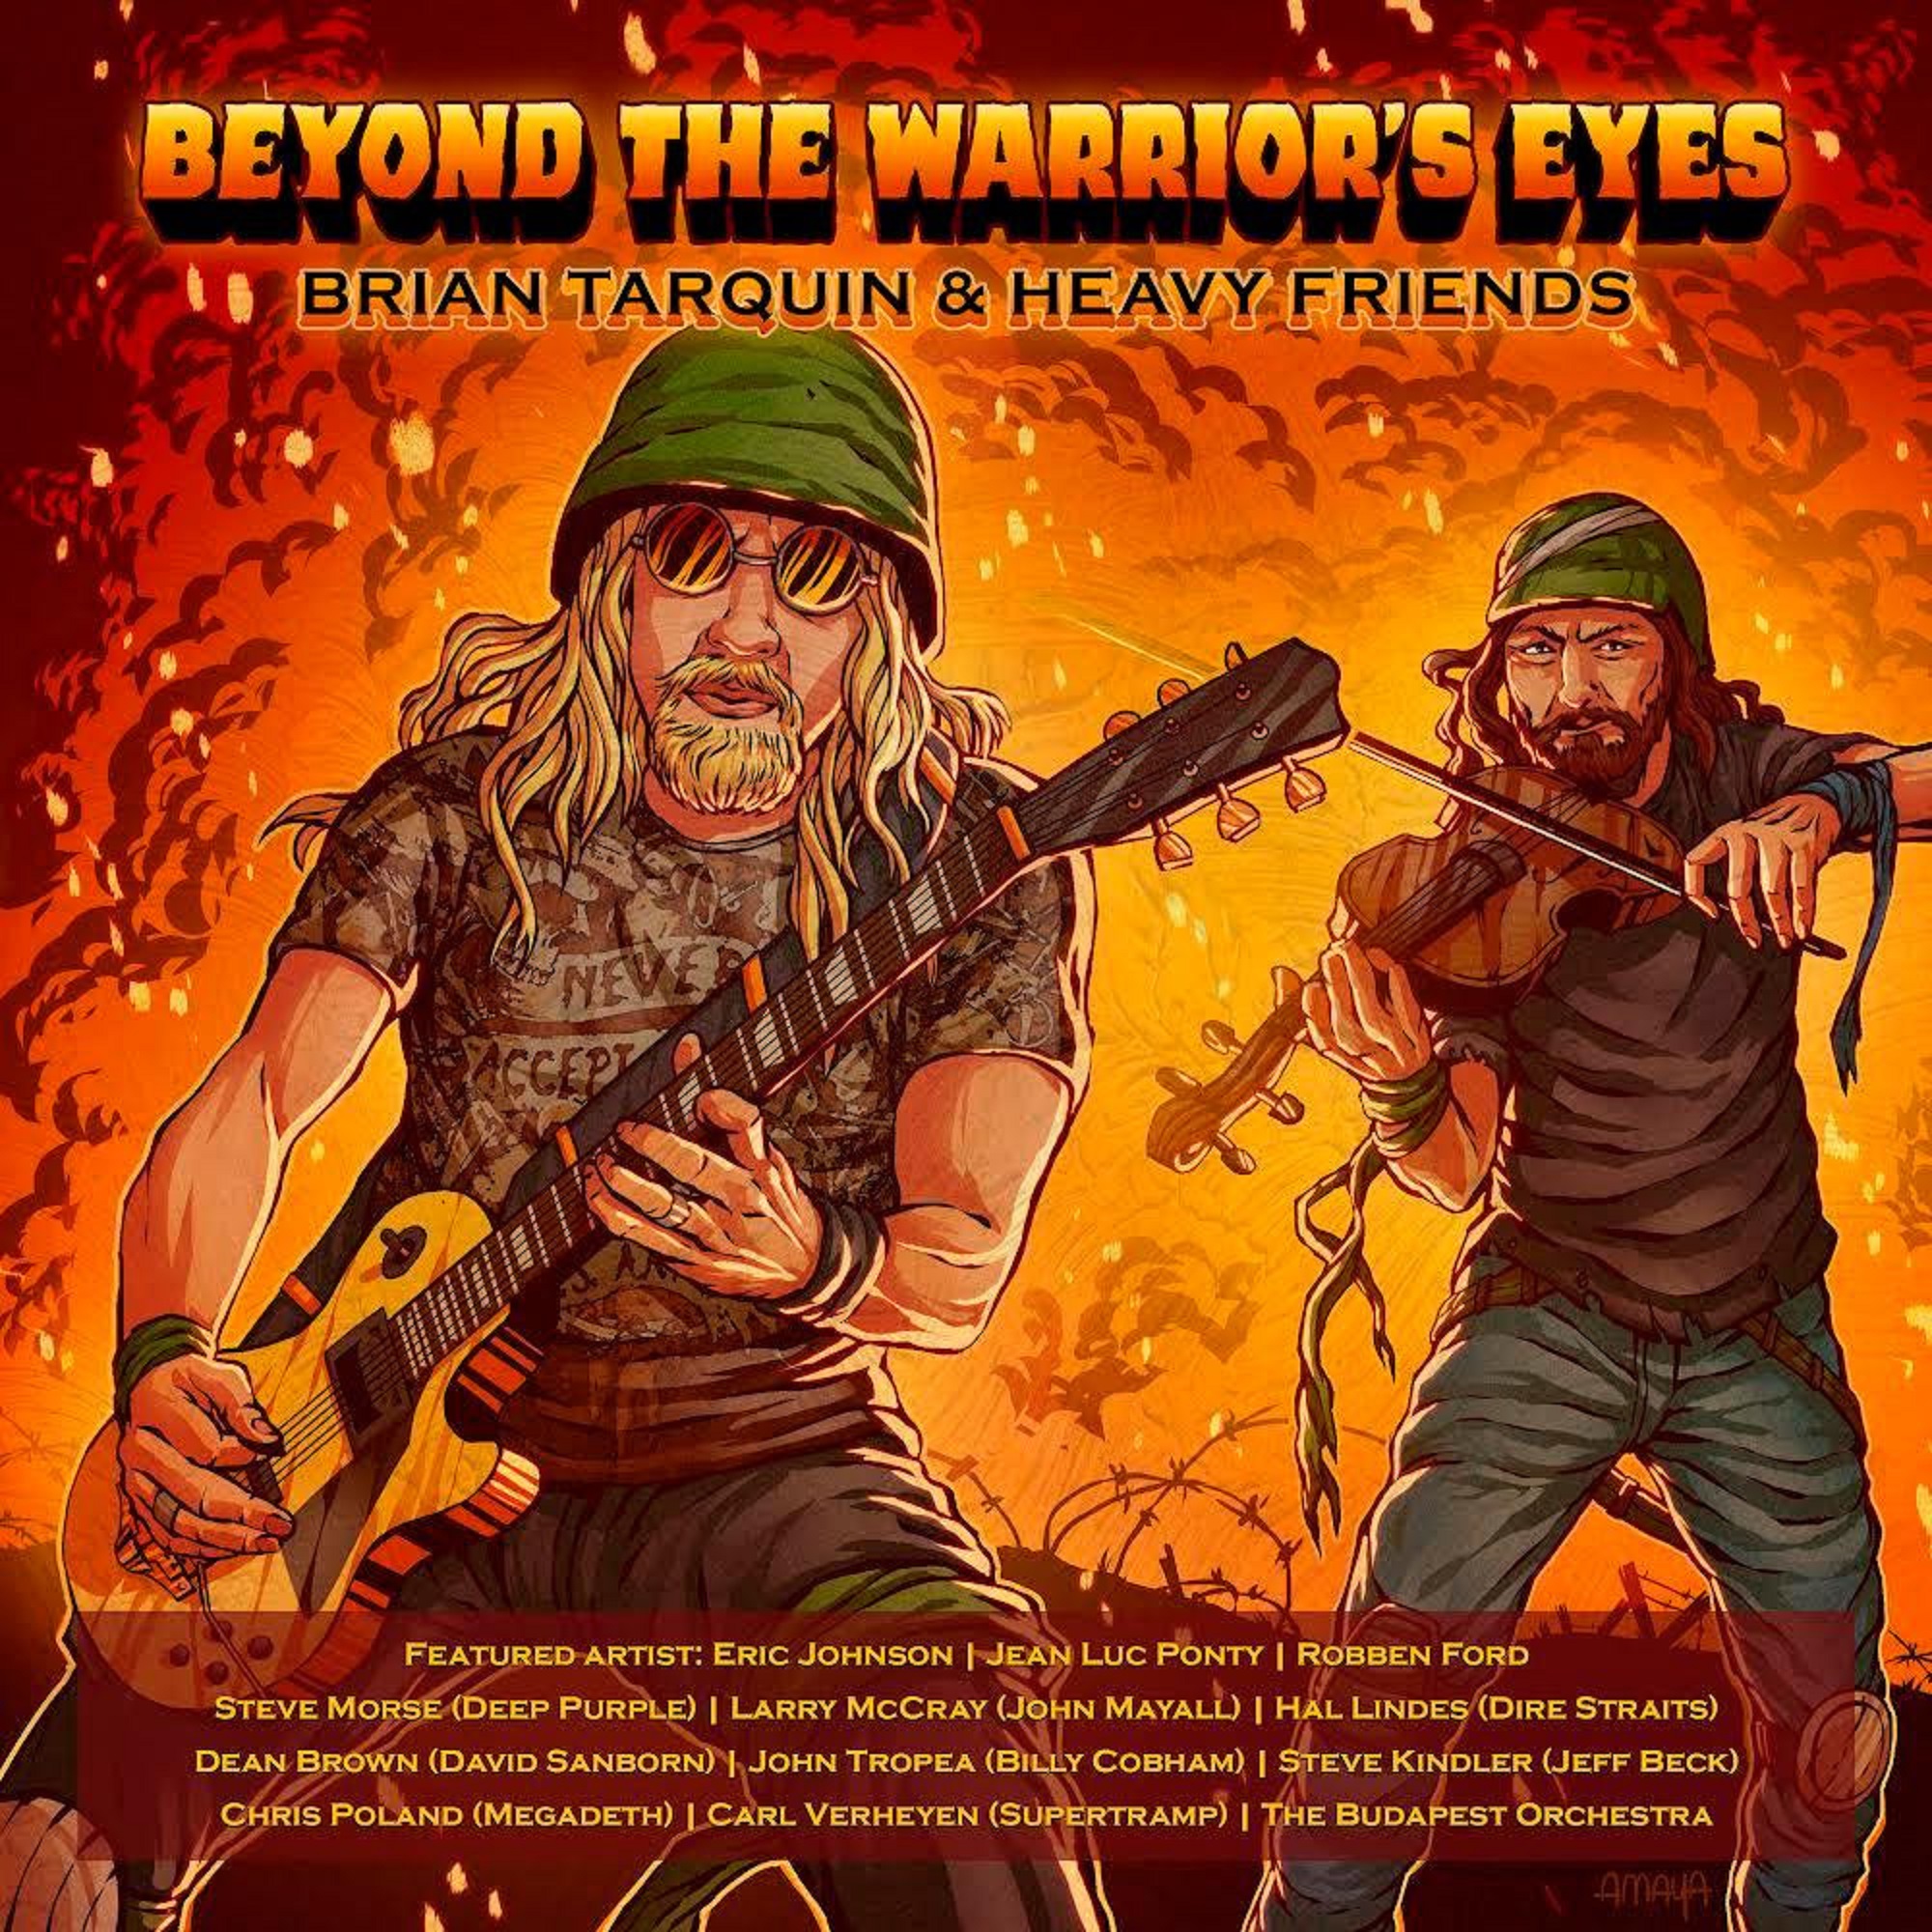 “Beyond The Warrior’s Eyes” By Brian Tarquin & his Heavy Friends